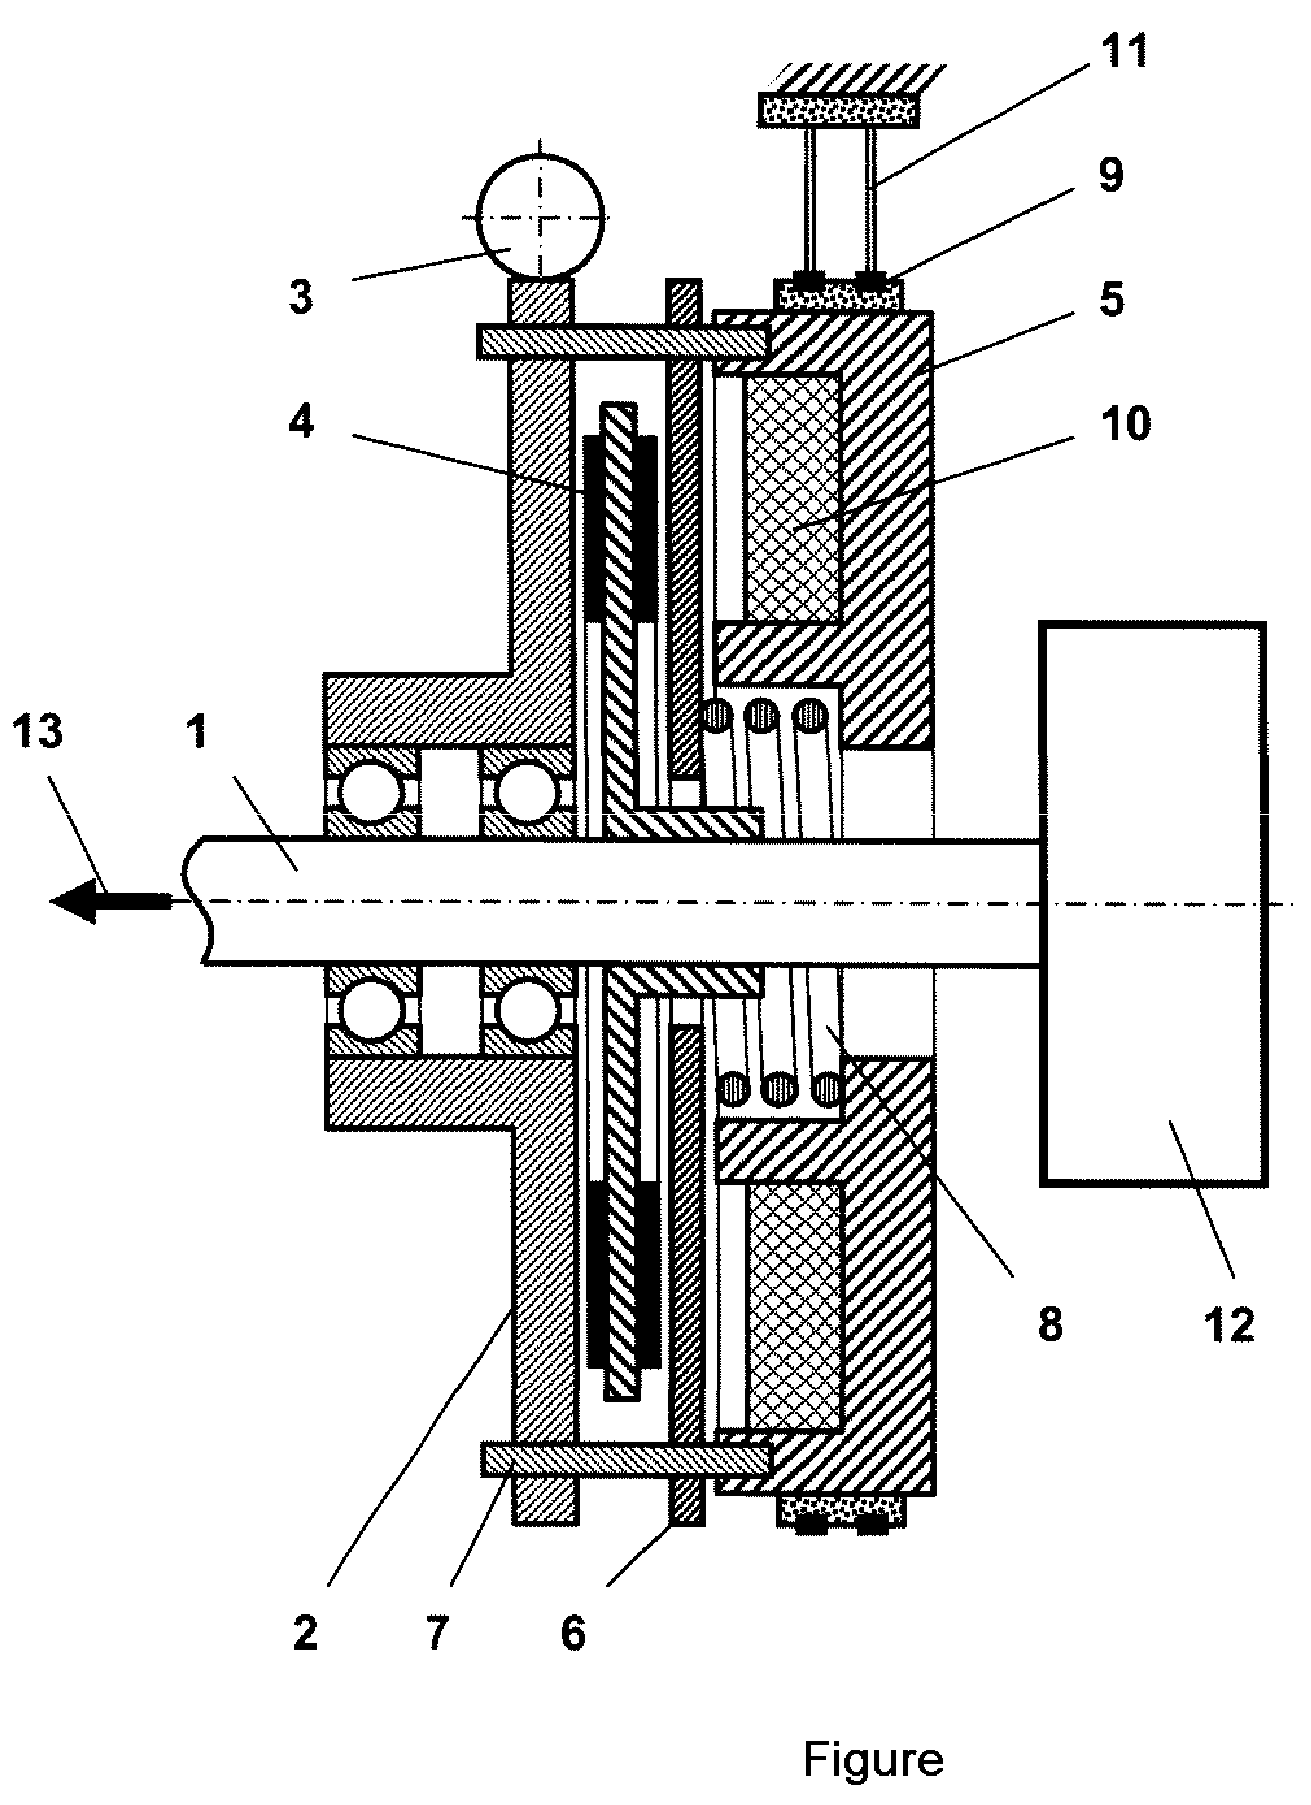 Manual drive for an electric-motor actuating drive